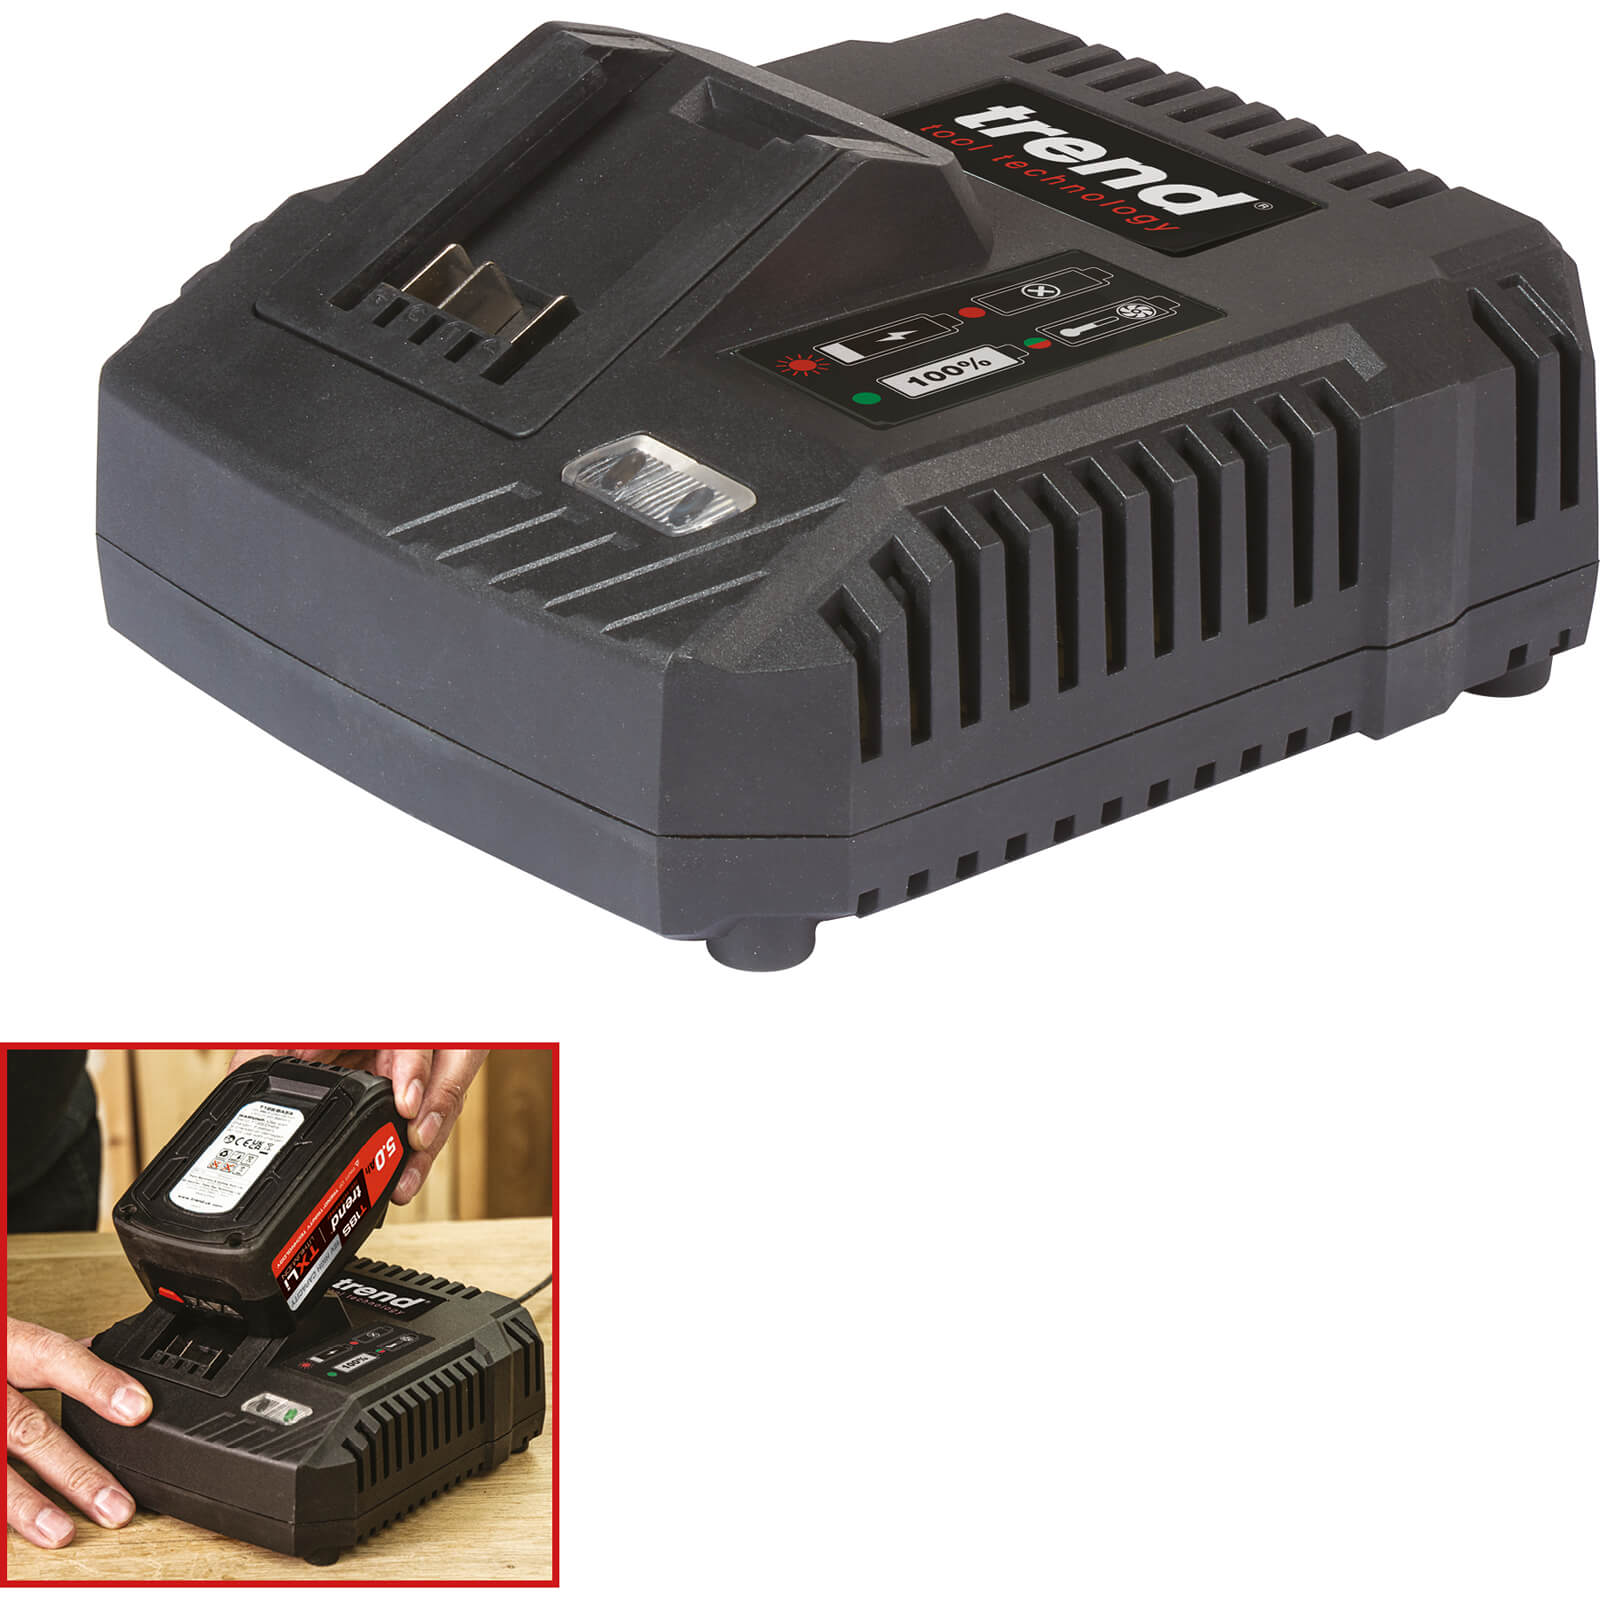 Photo of Trend Genuine T18s/ch6a 18v Fast Cordless Txli Li-ion Battery Charger 240v